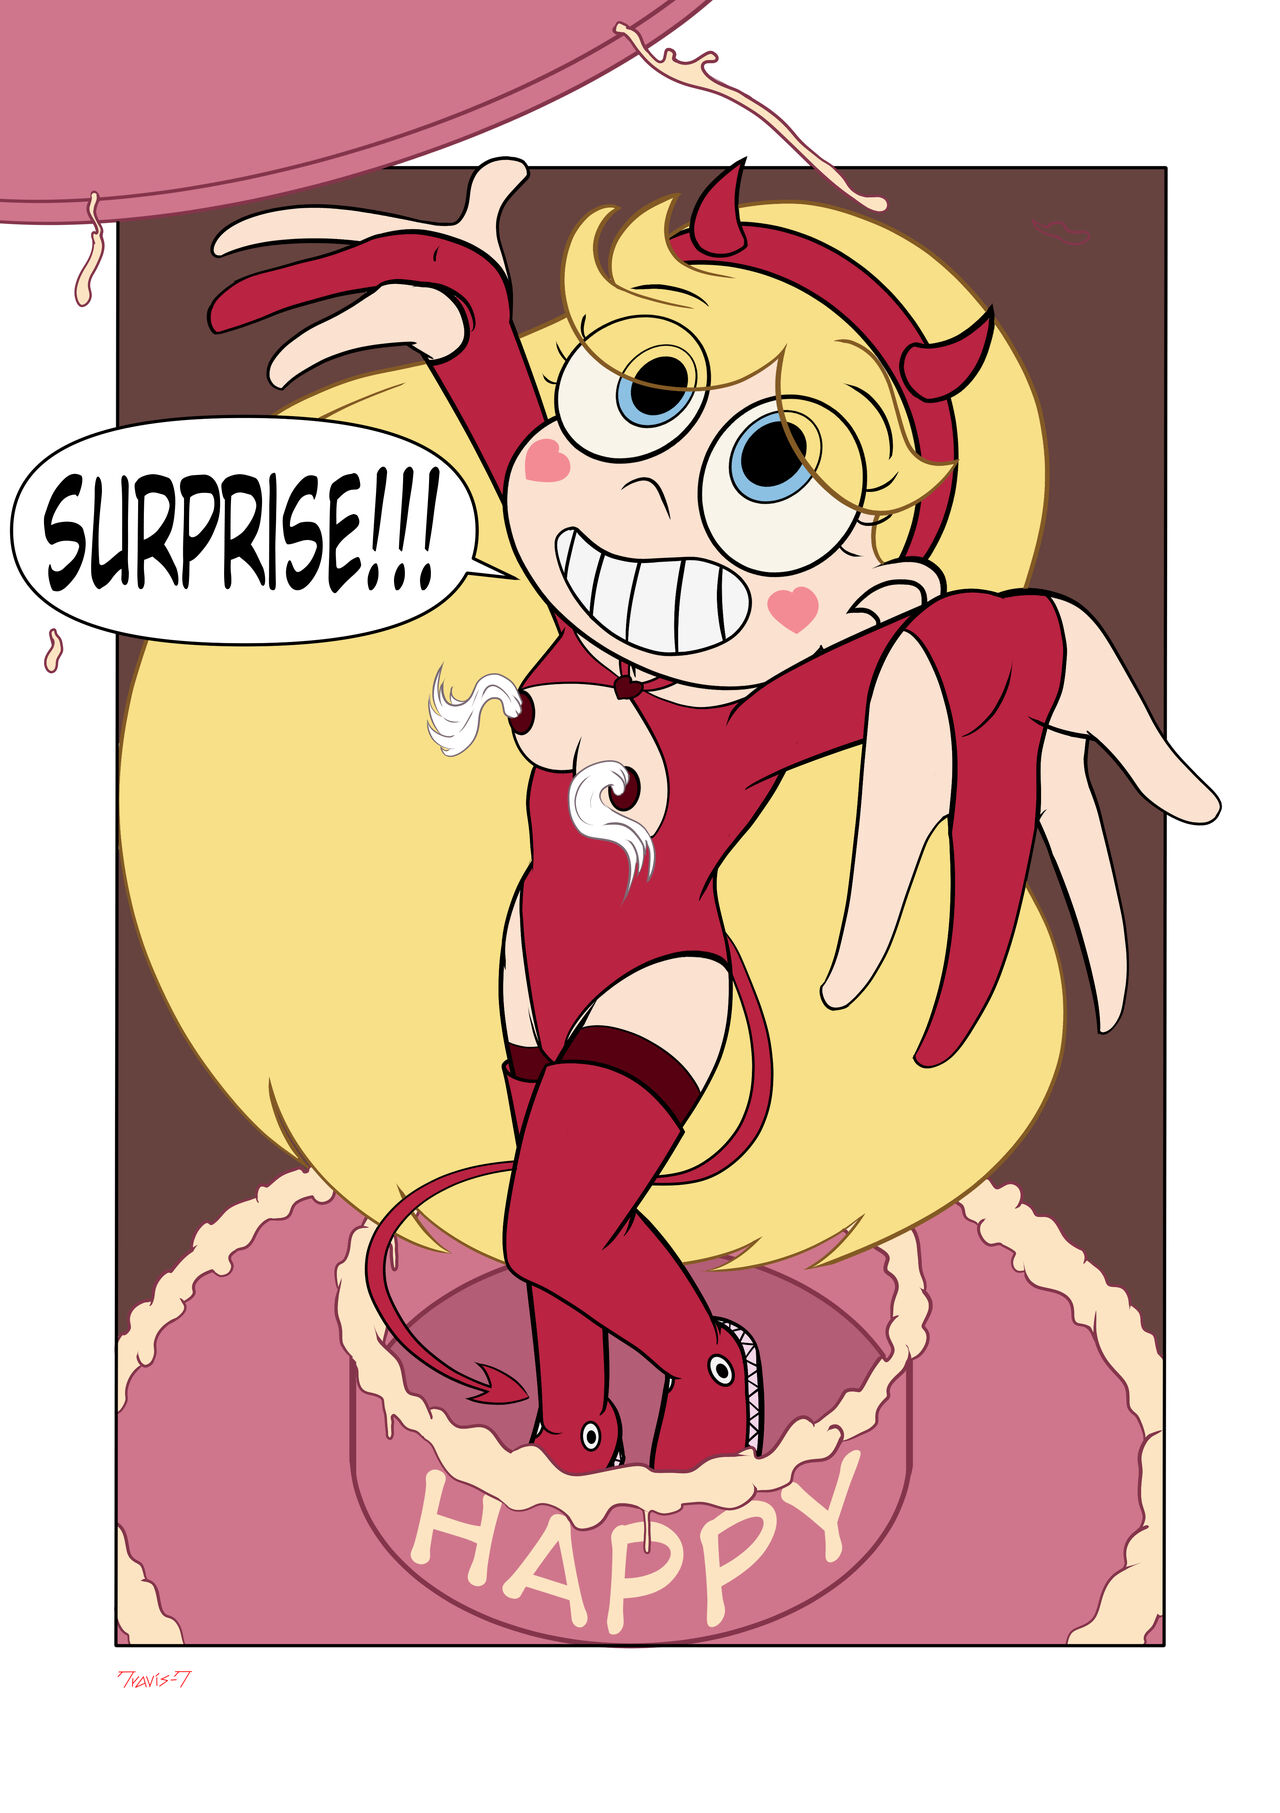 A Star is Born – Star vs. the Forces of Evil by Travis-T